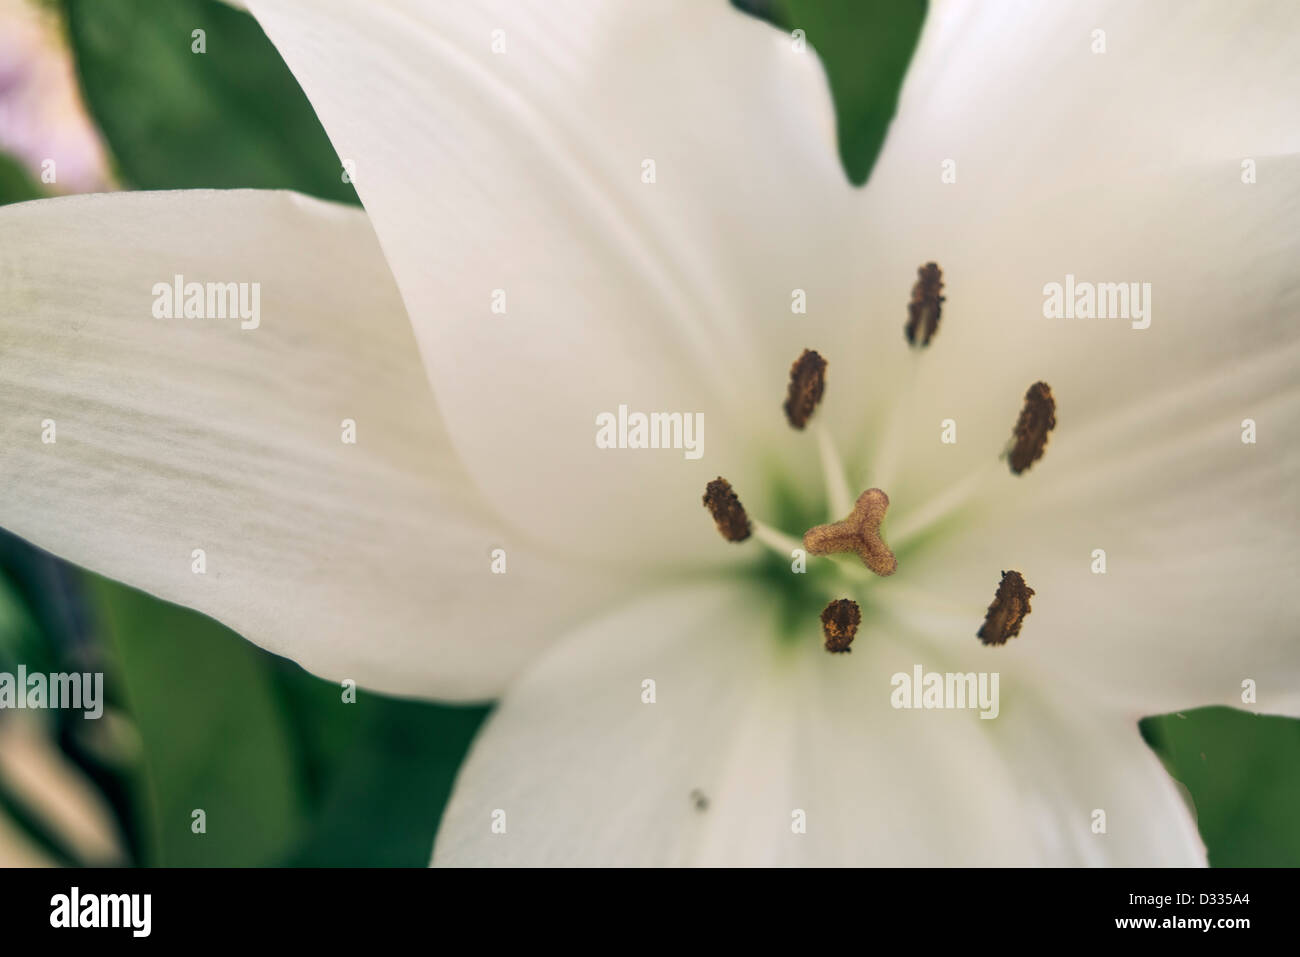 White Easter lily blossom closeup and off-center Stock Photo